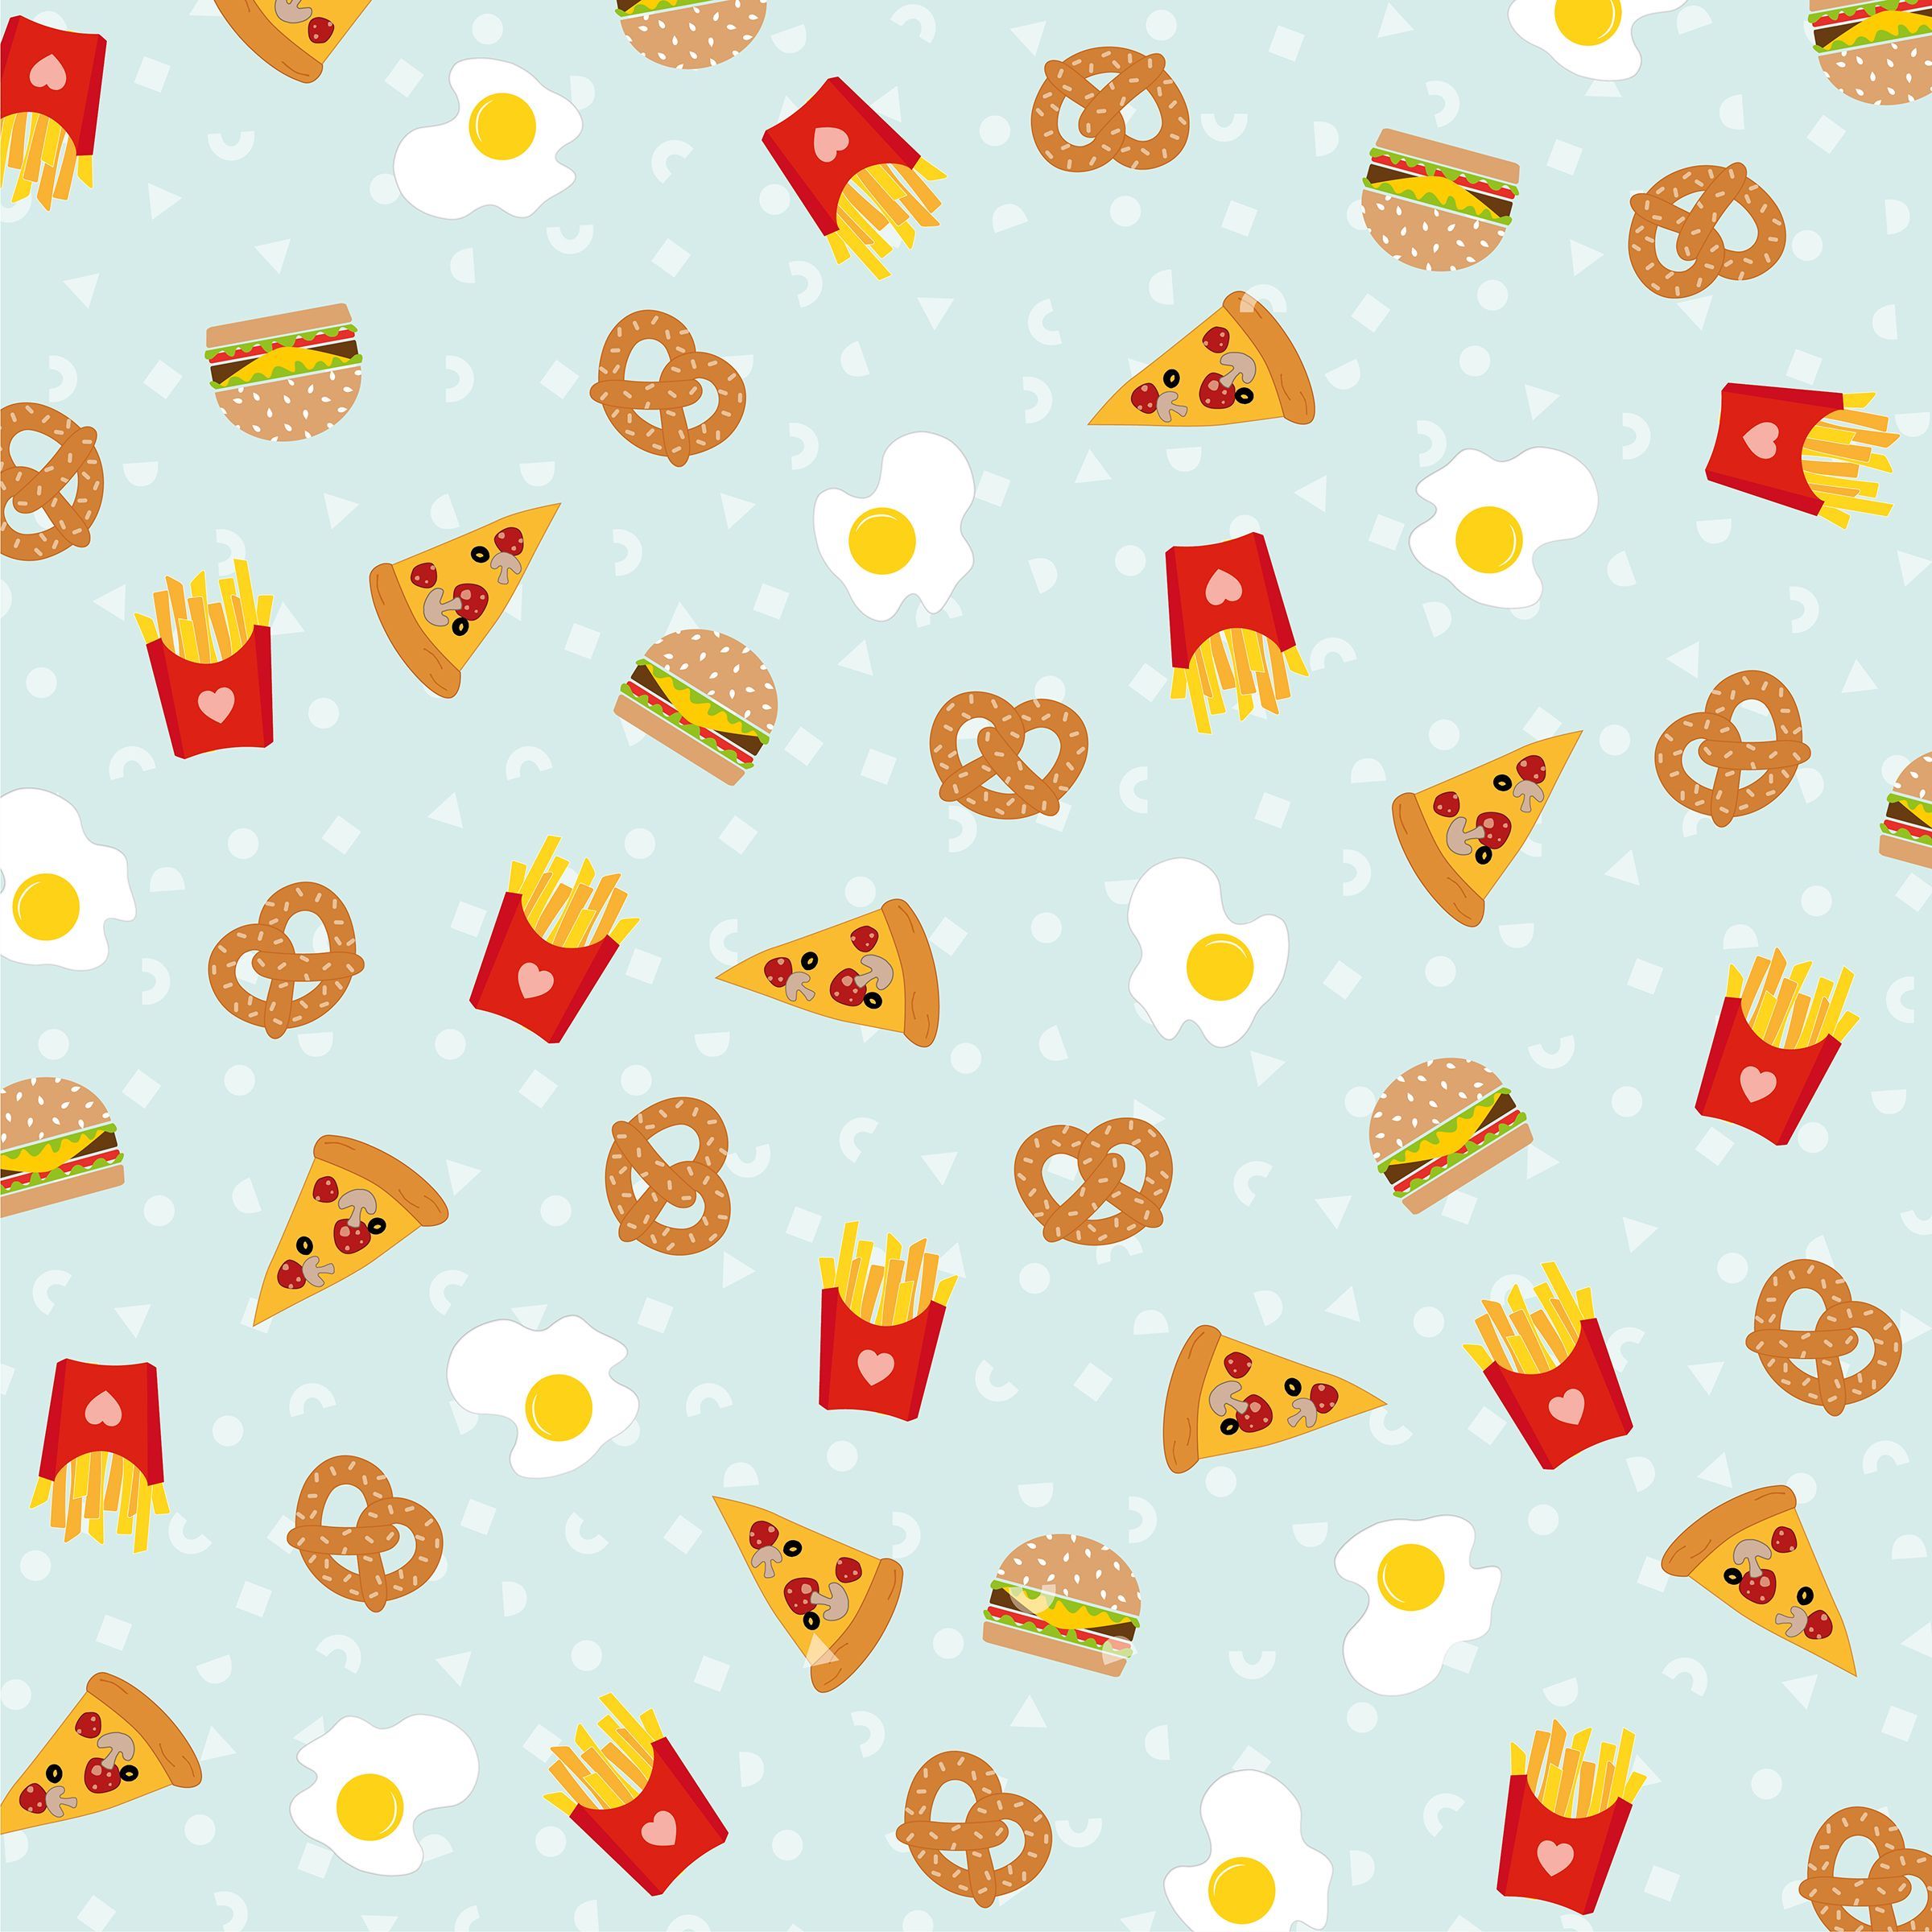 A pattern of food items on blue background - Foodie, food